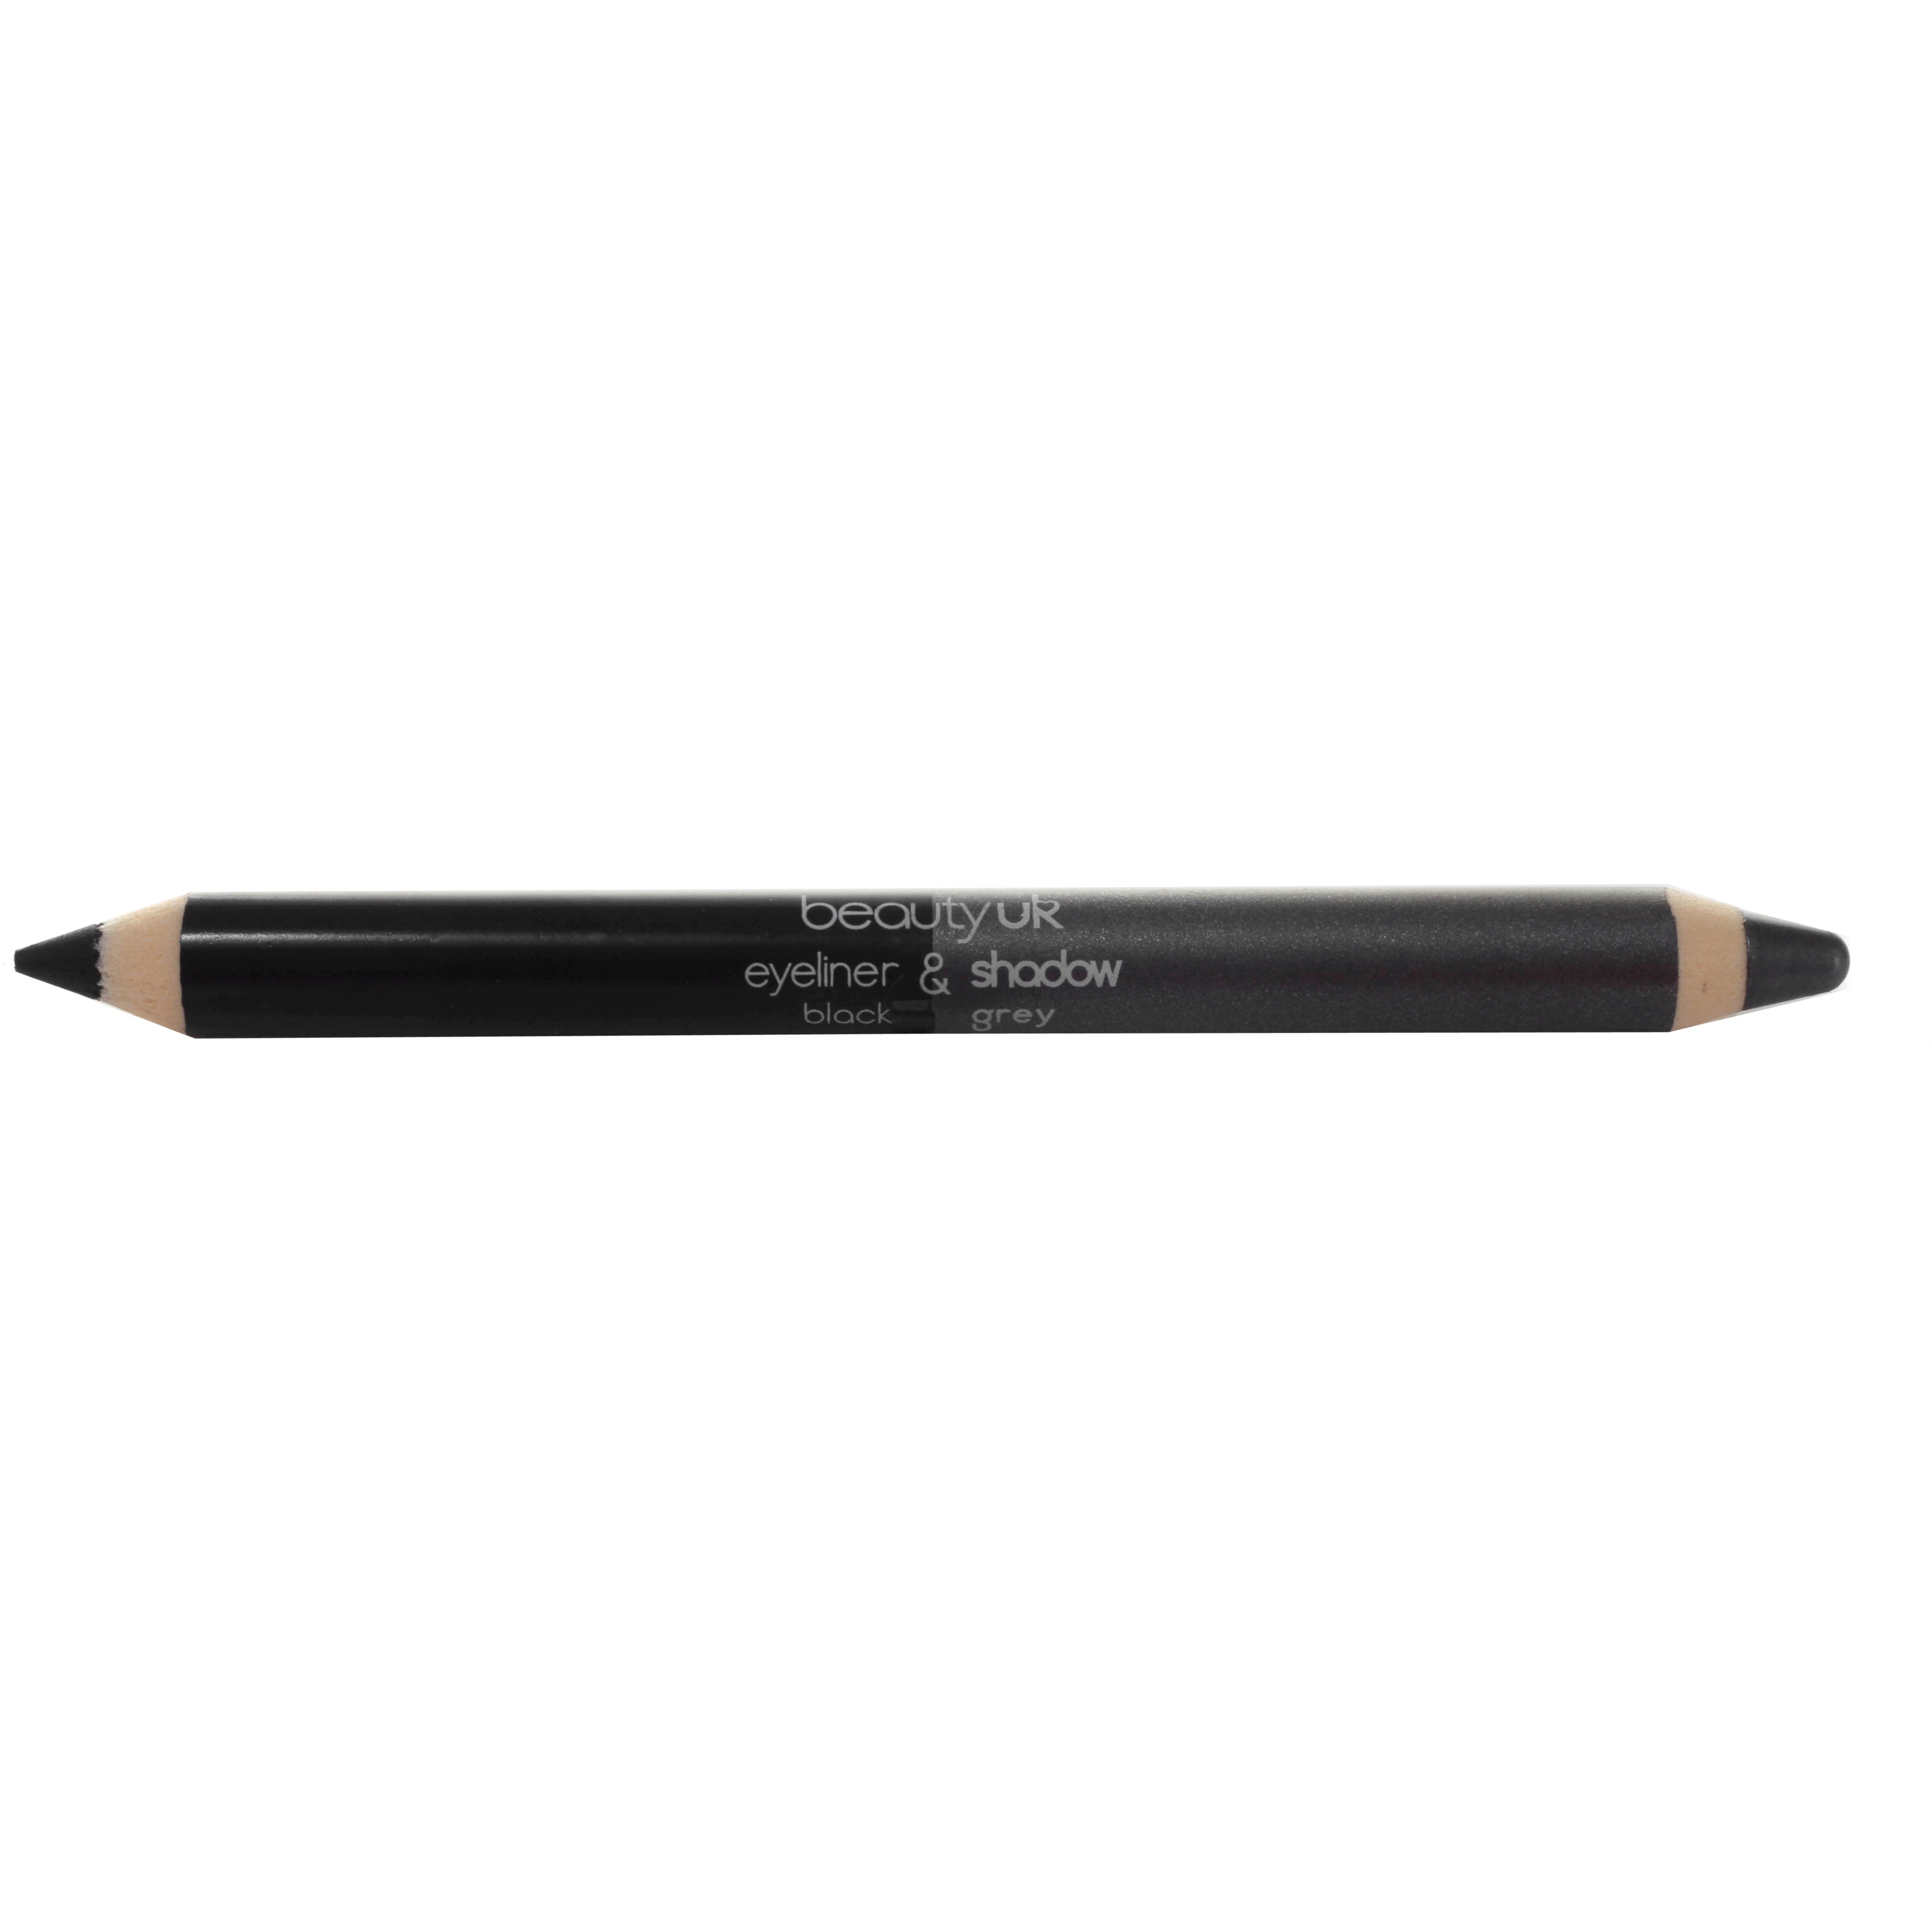 Beauty uk double ended pencil black/ grey